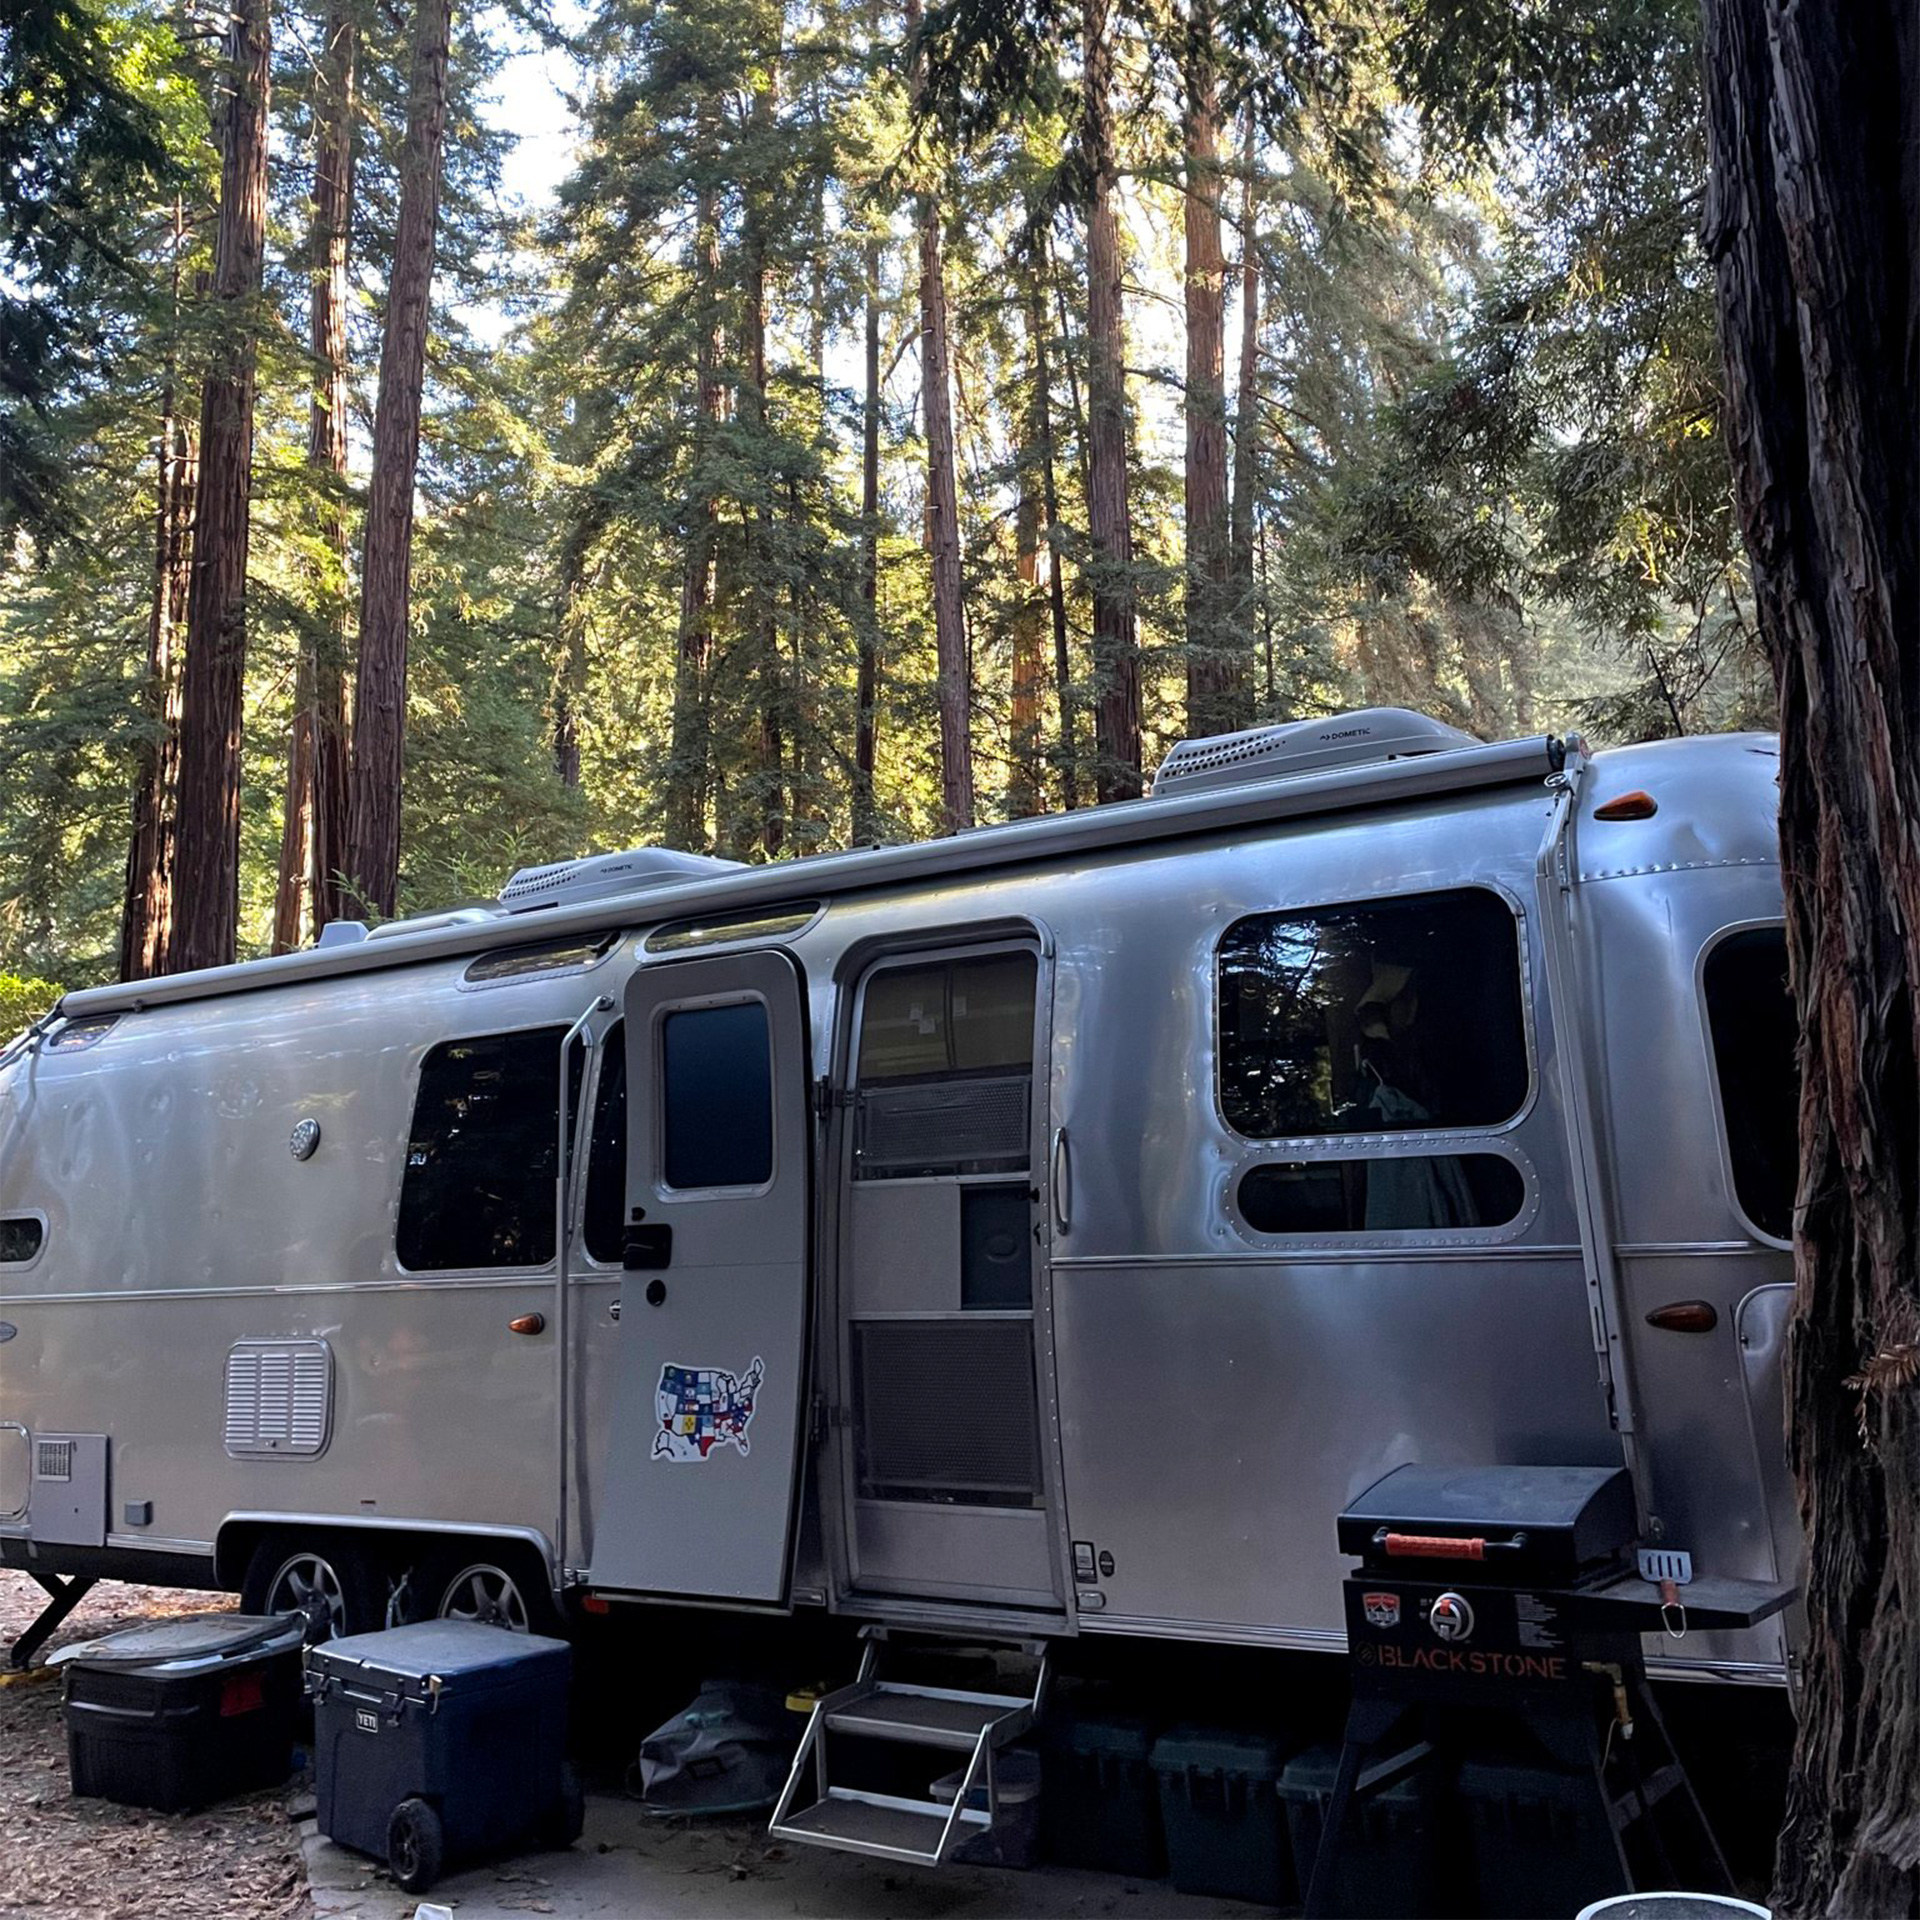 An Airstream travel trailer parked in a woods while a family camps.